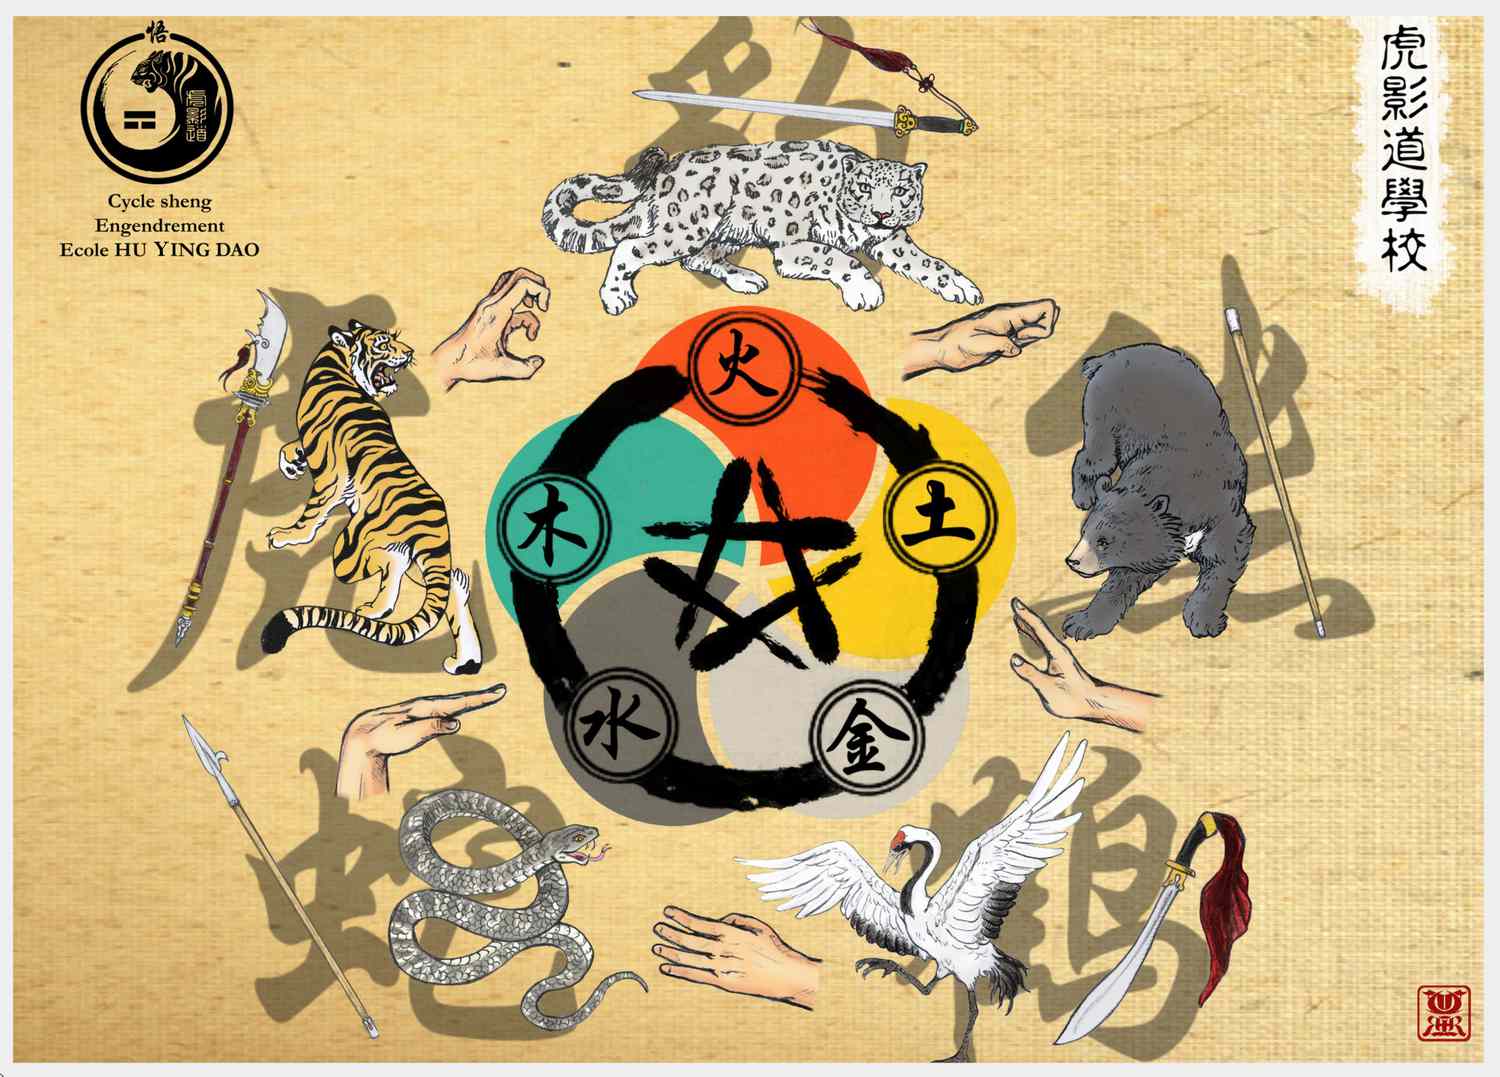 Cycles of Harmony and Destruction Between Chinese Elements